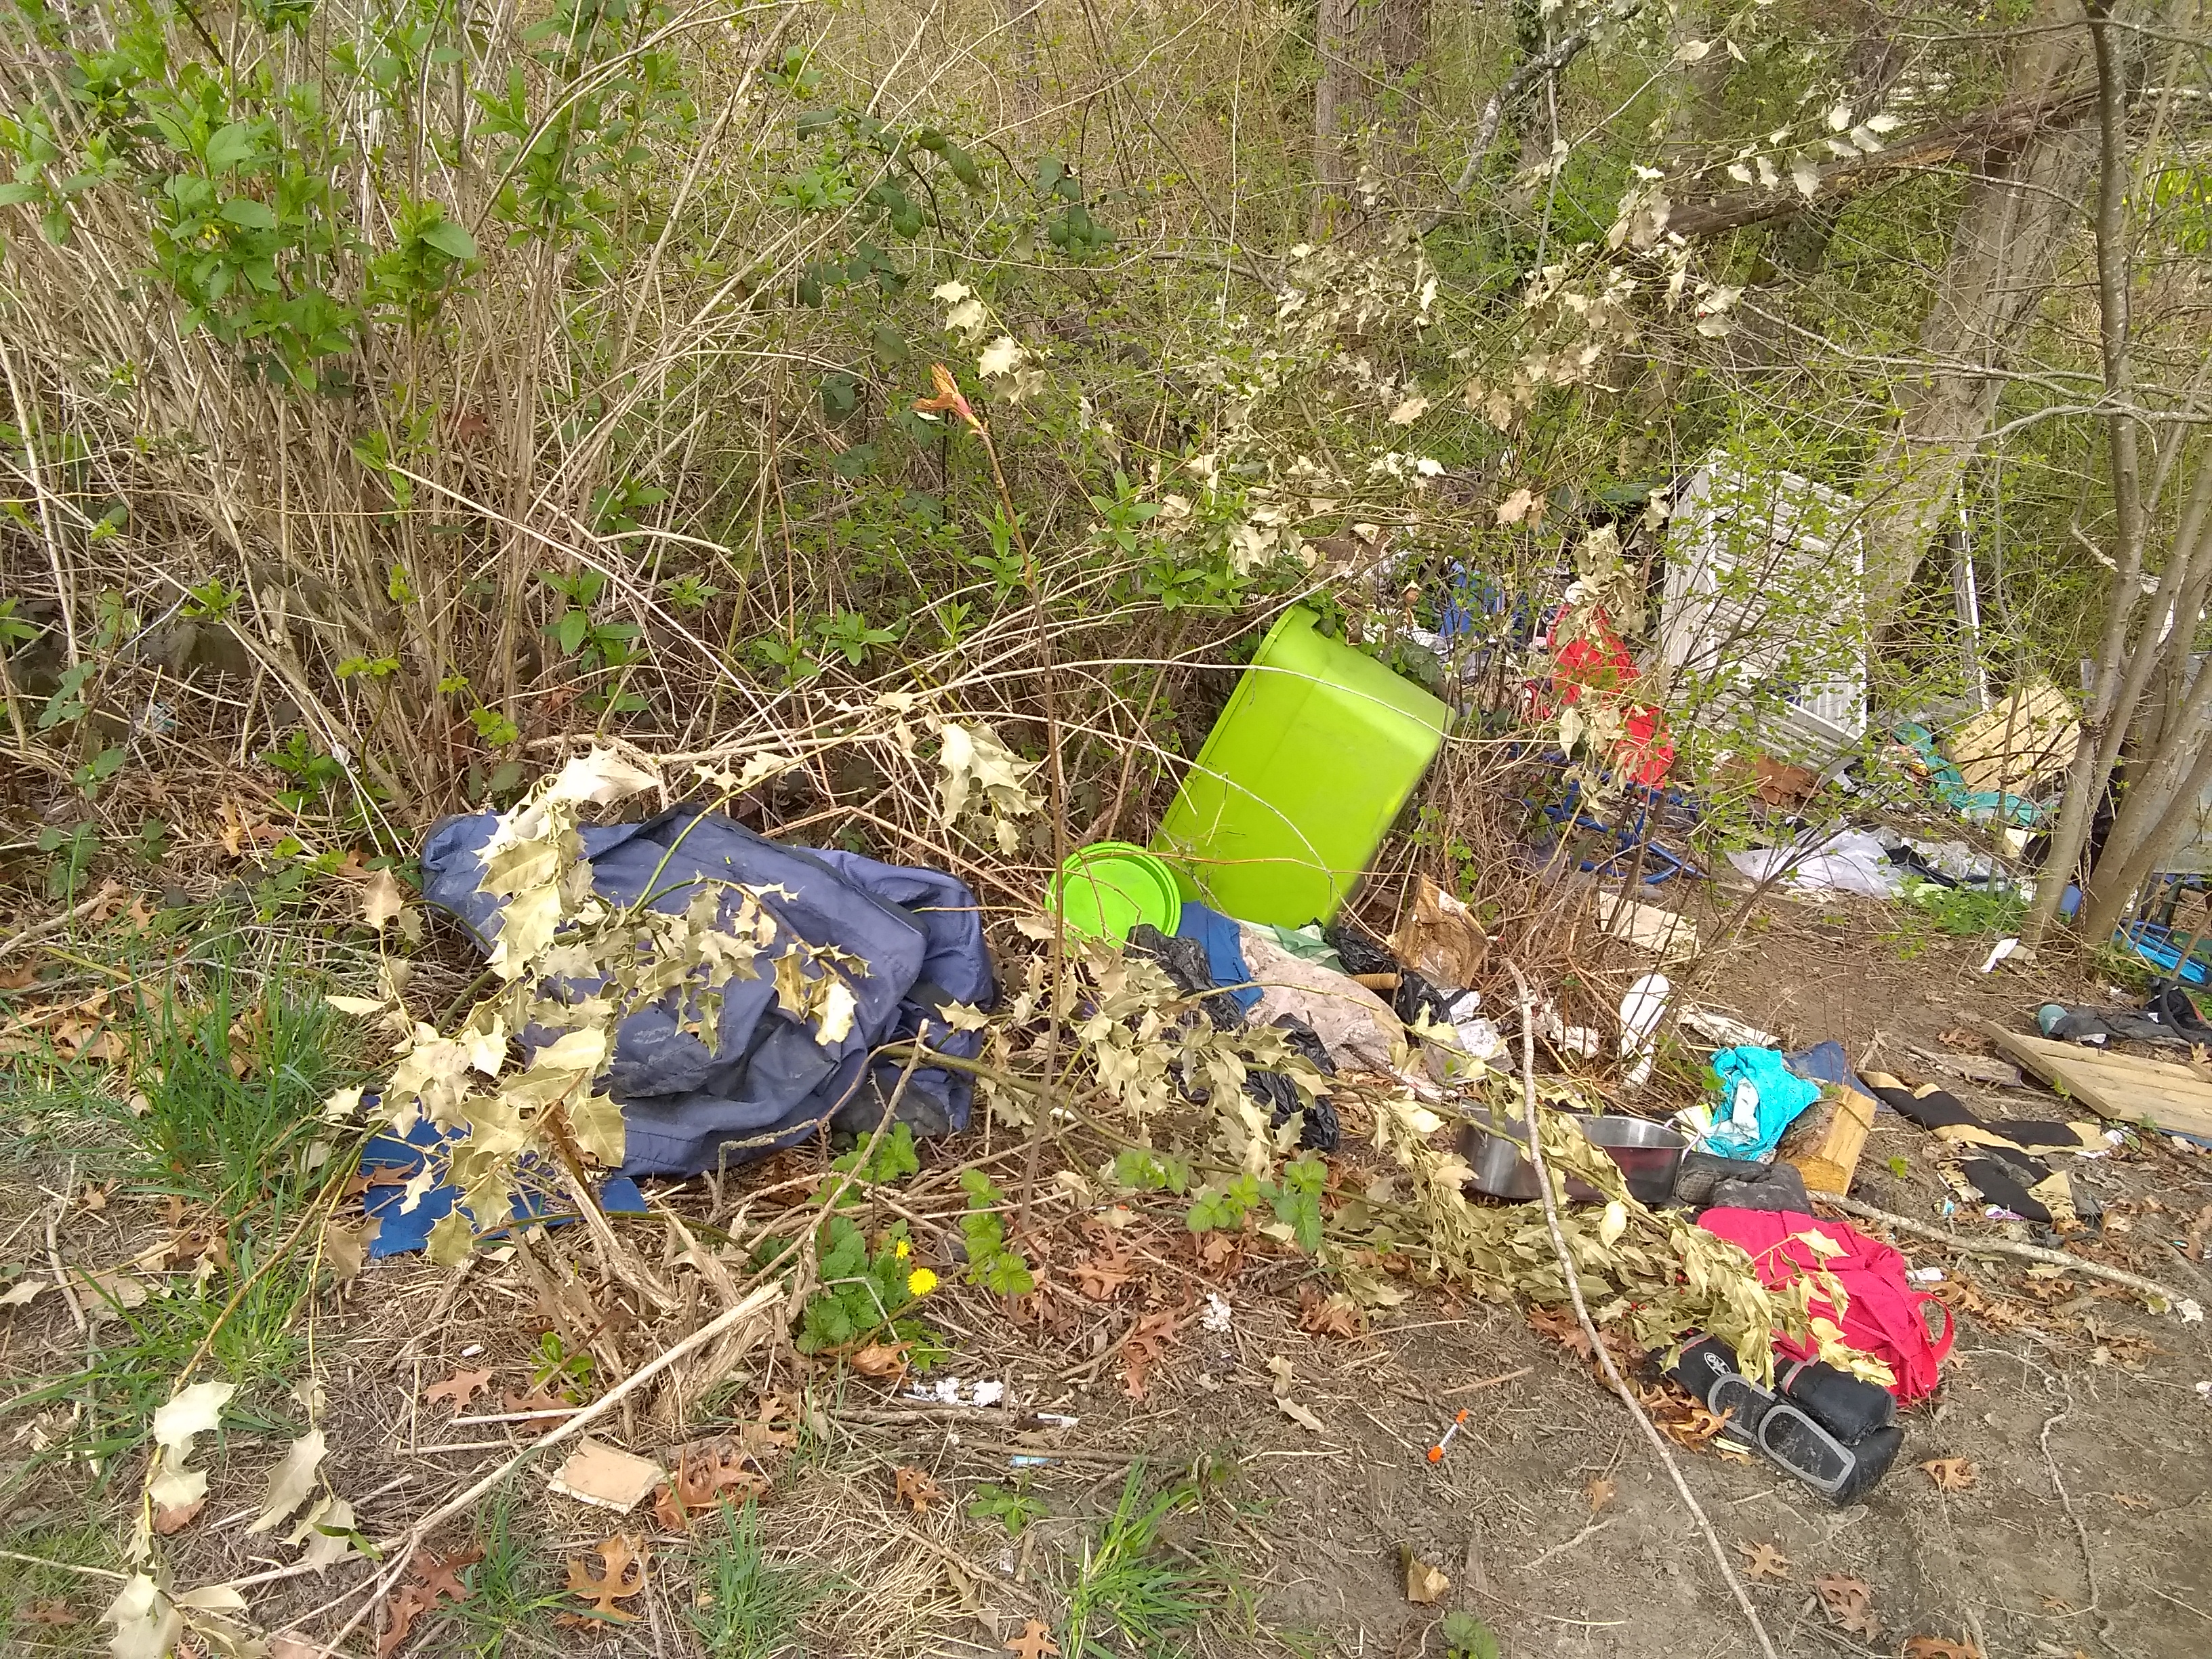 2018: Homeless Camps in Seattle’s Parks and Green Spaces